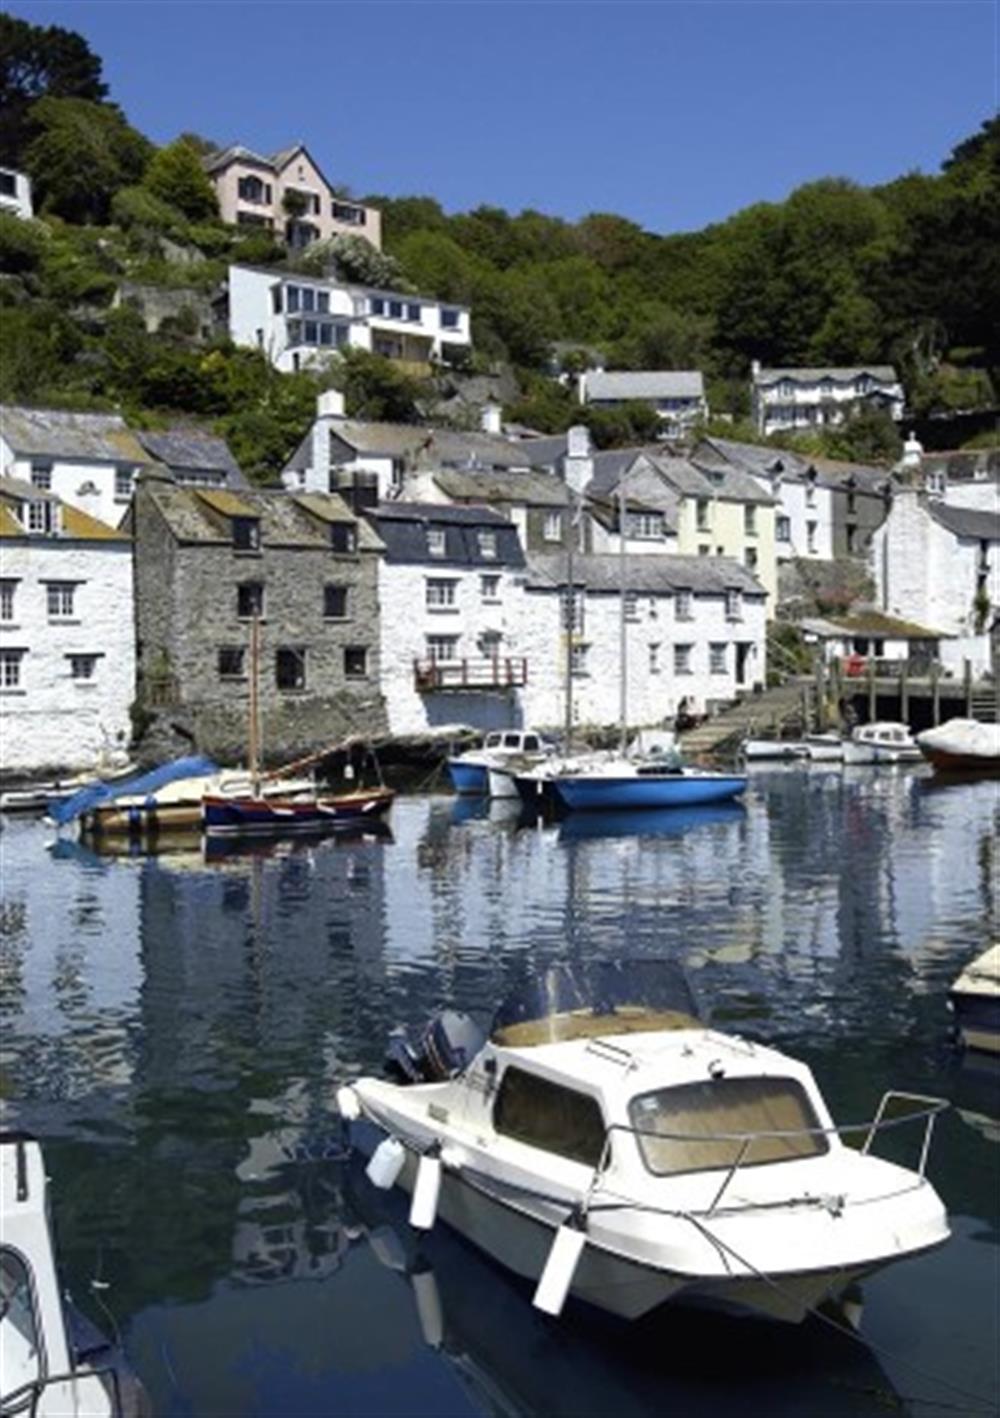 The harbour in Polperro at The Old Barbican in Looe